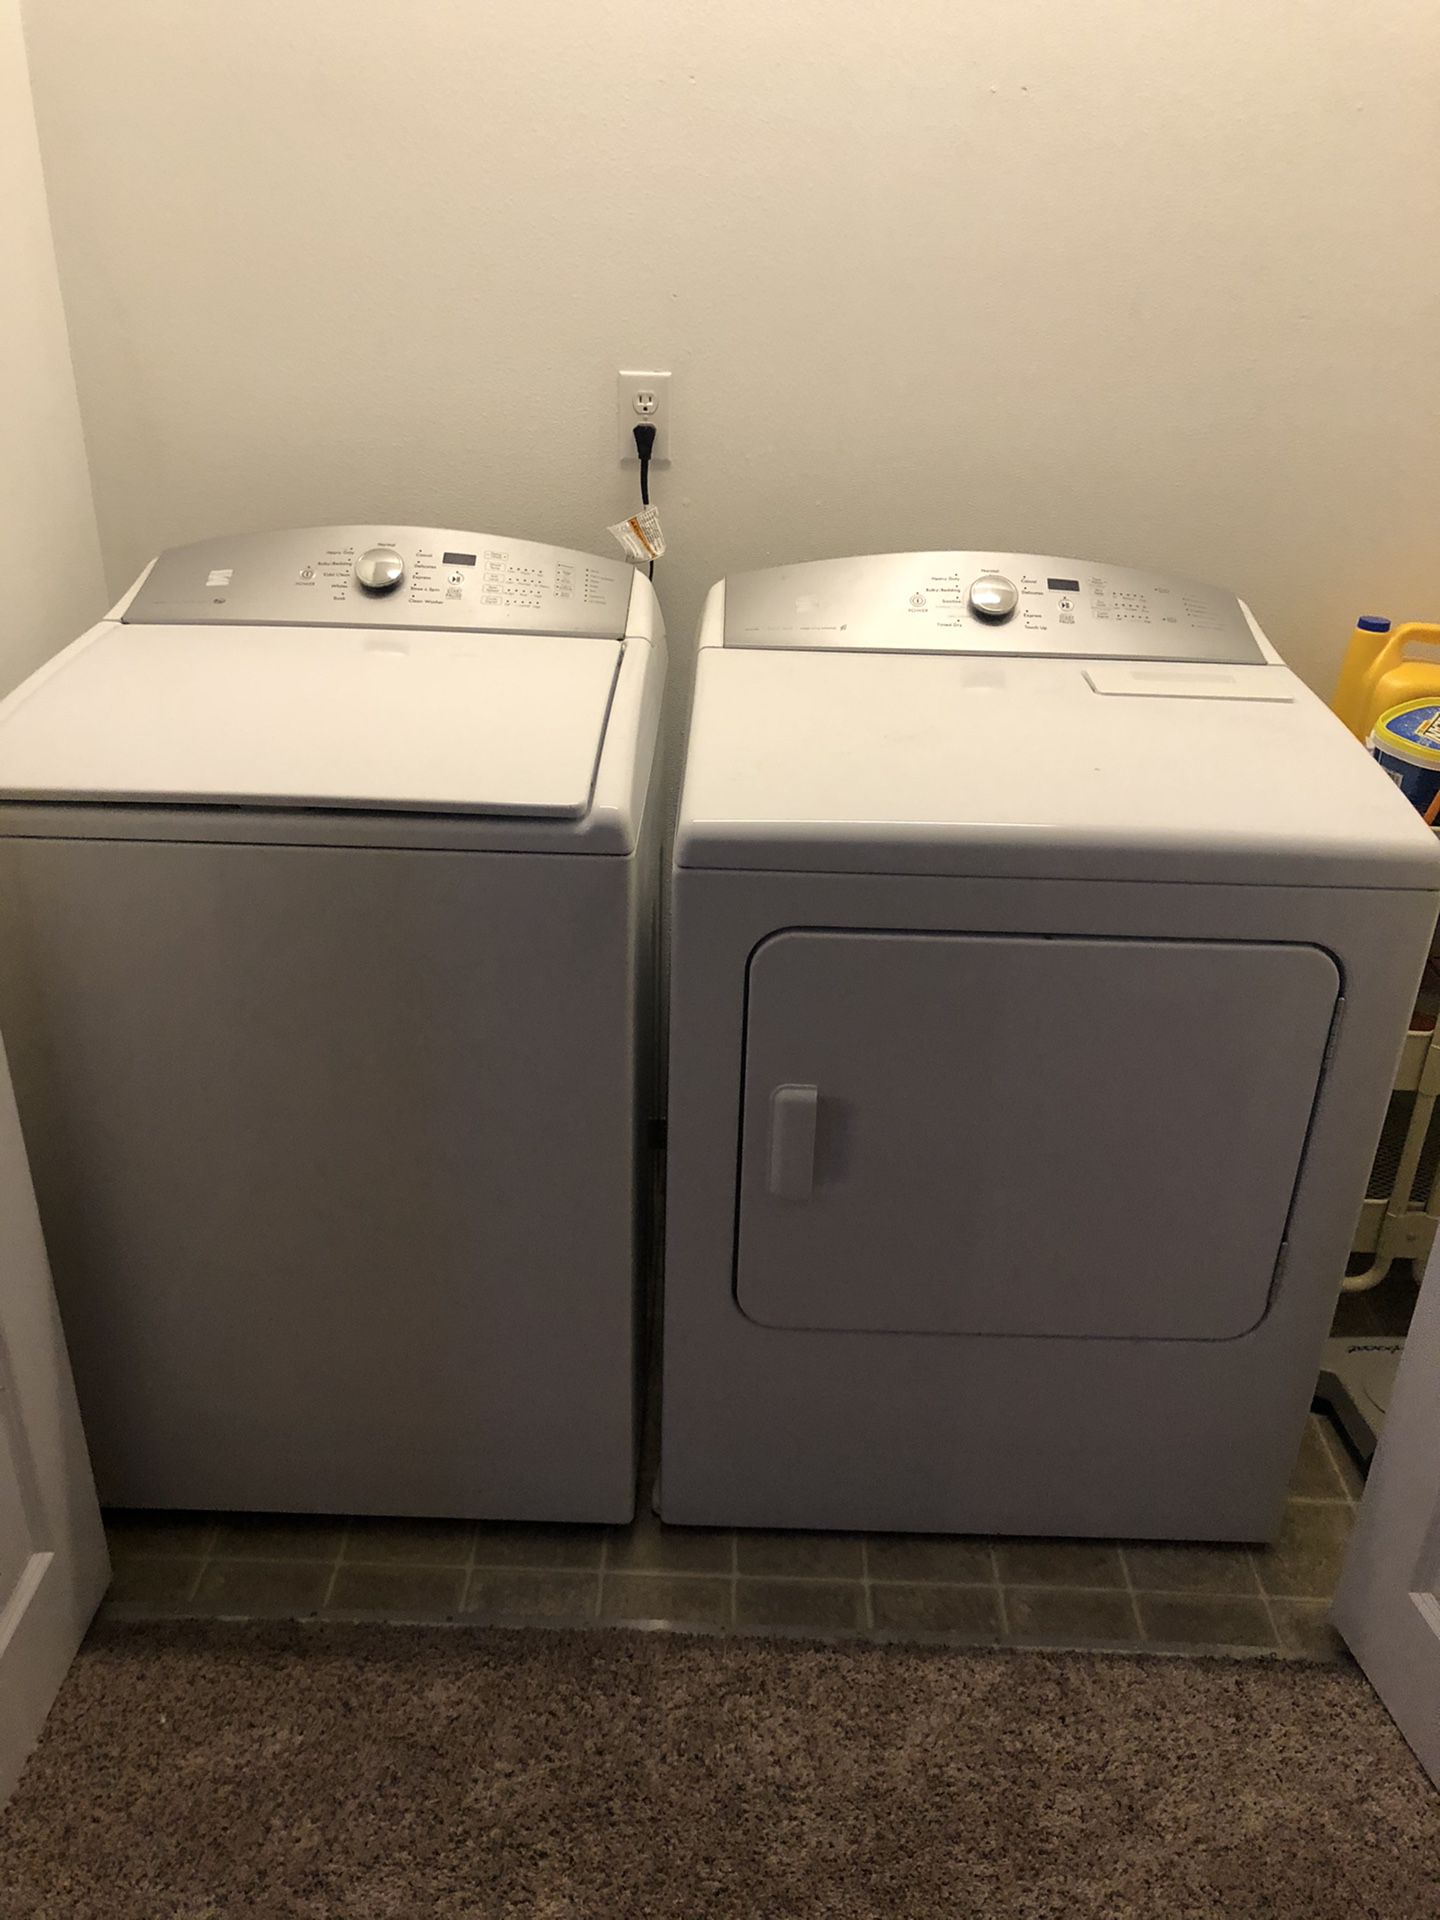 Kenmore 600 series washer and dryer